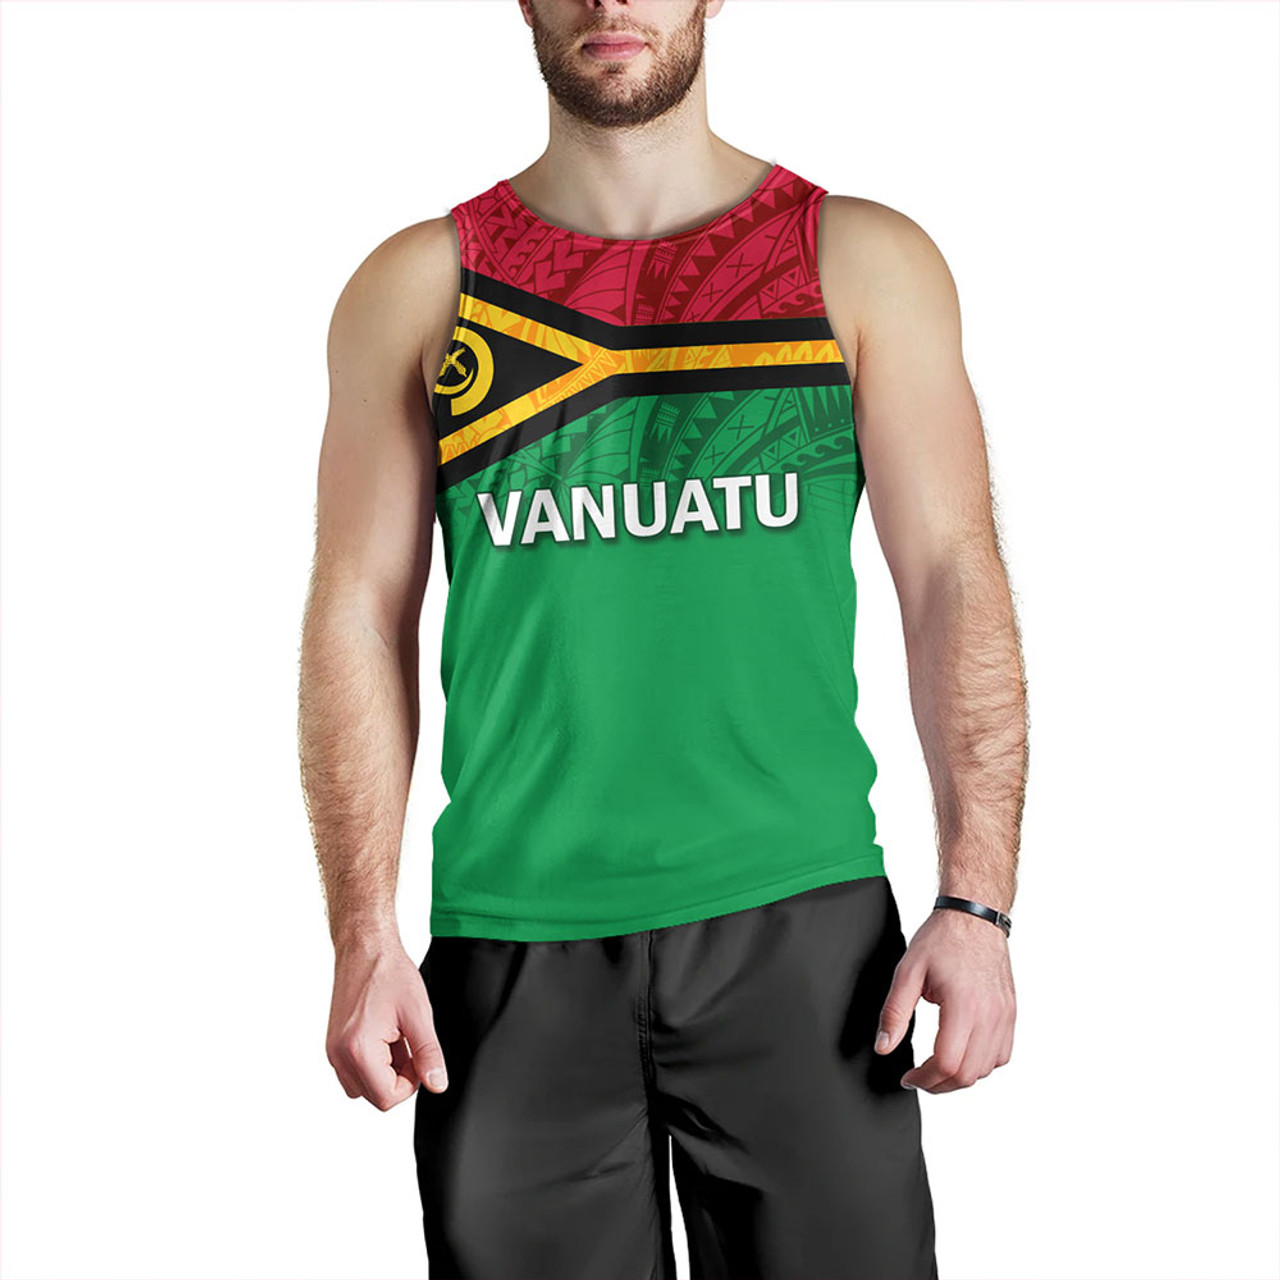 Vanuatu Tank Top - Flag Color With Traditional Patterns